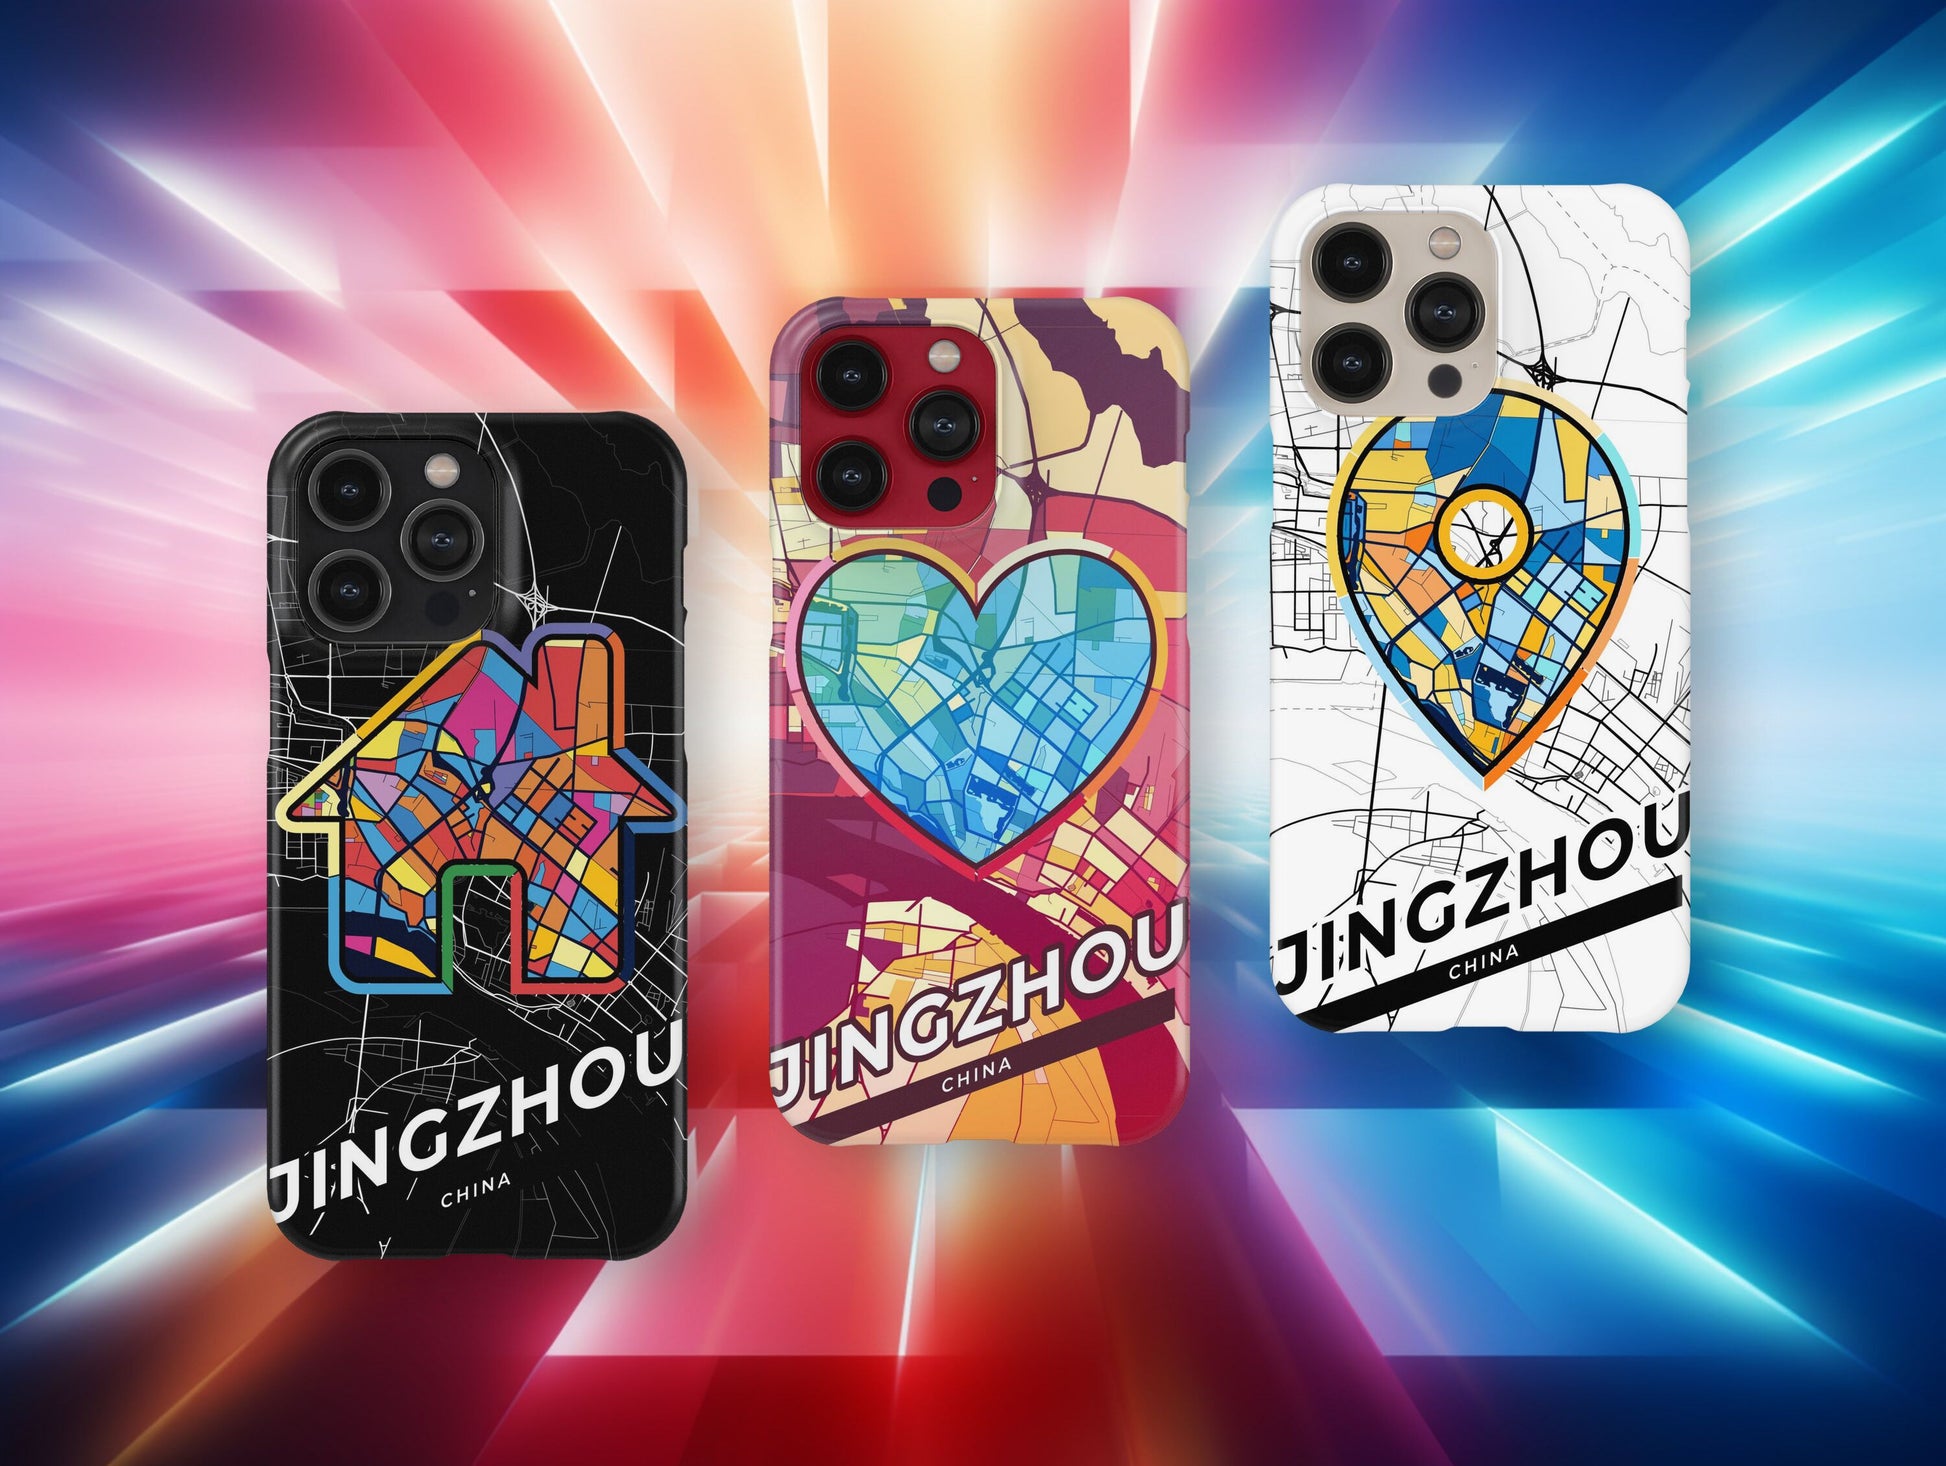 Jingzhou China slim phone case with colorful icon. Birthday, wedding or housewarming gift. Couple match cases.